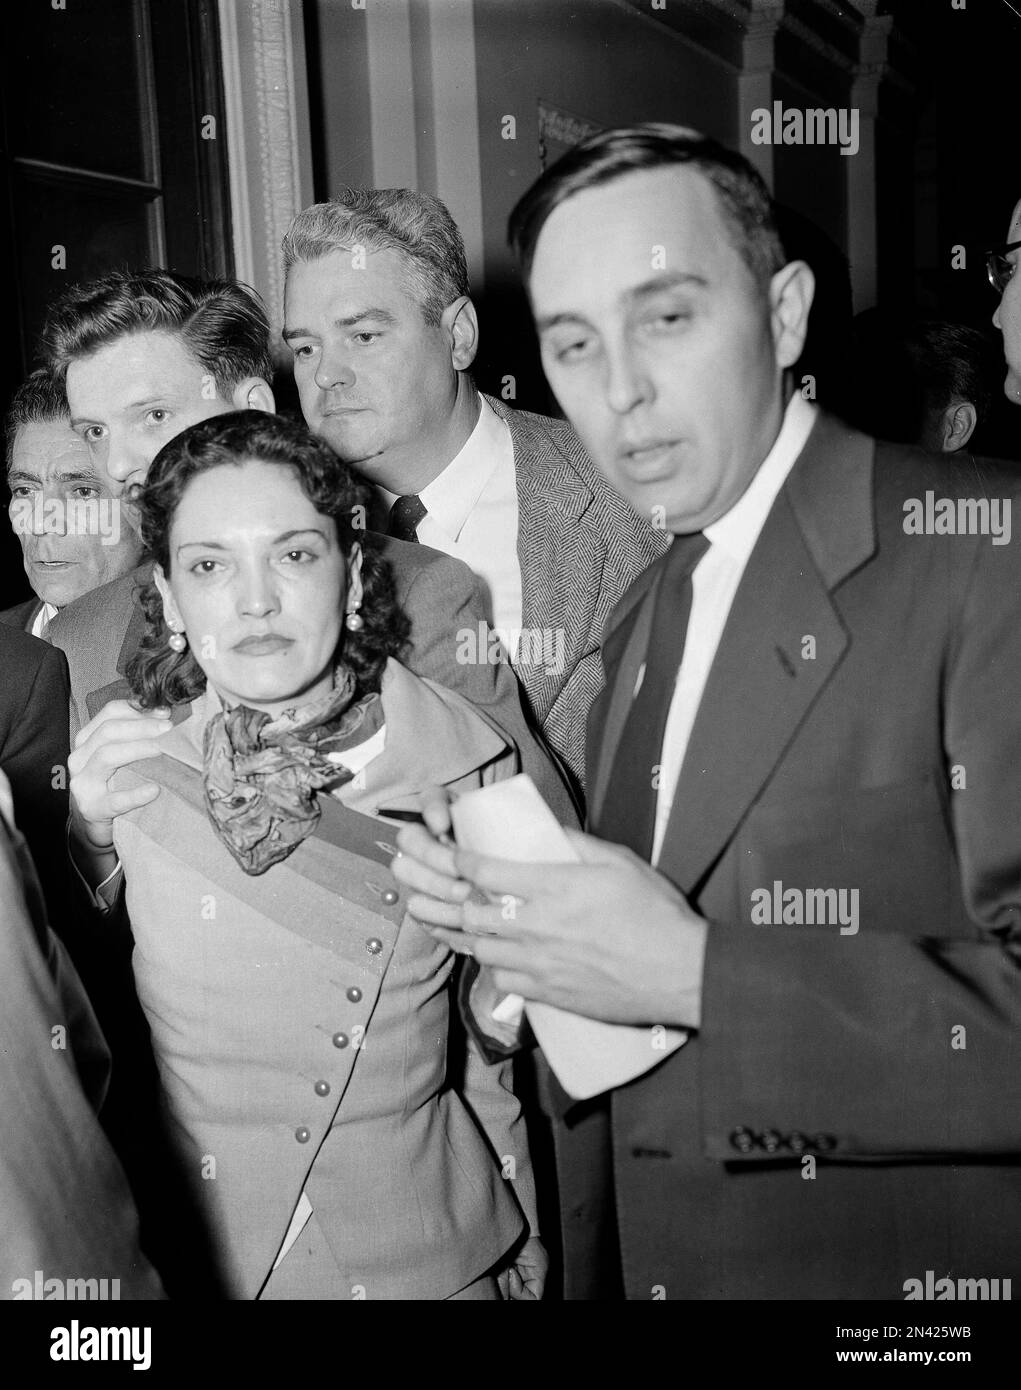 Puerto Rican nationalist, Lolita Lebron, is hustled through the crowd after  she was involved in a shooting attack on Capitol Hill, March 1, 1954 .  While shouting "Free Puerto Rico," a commando